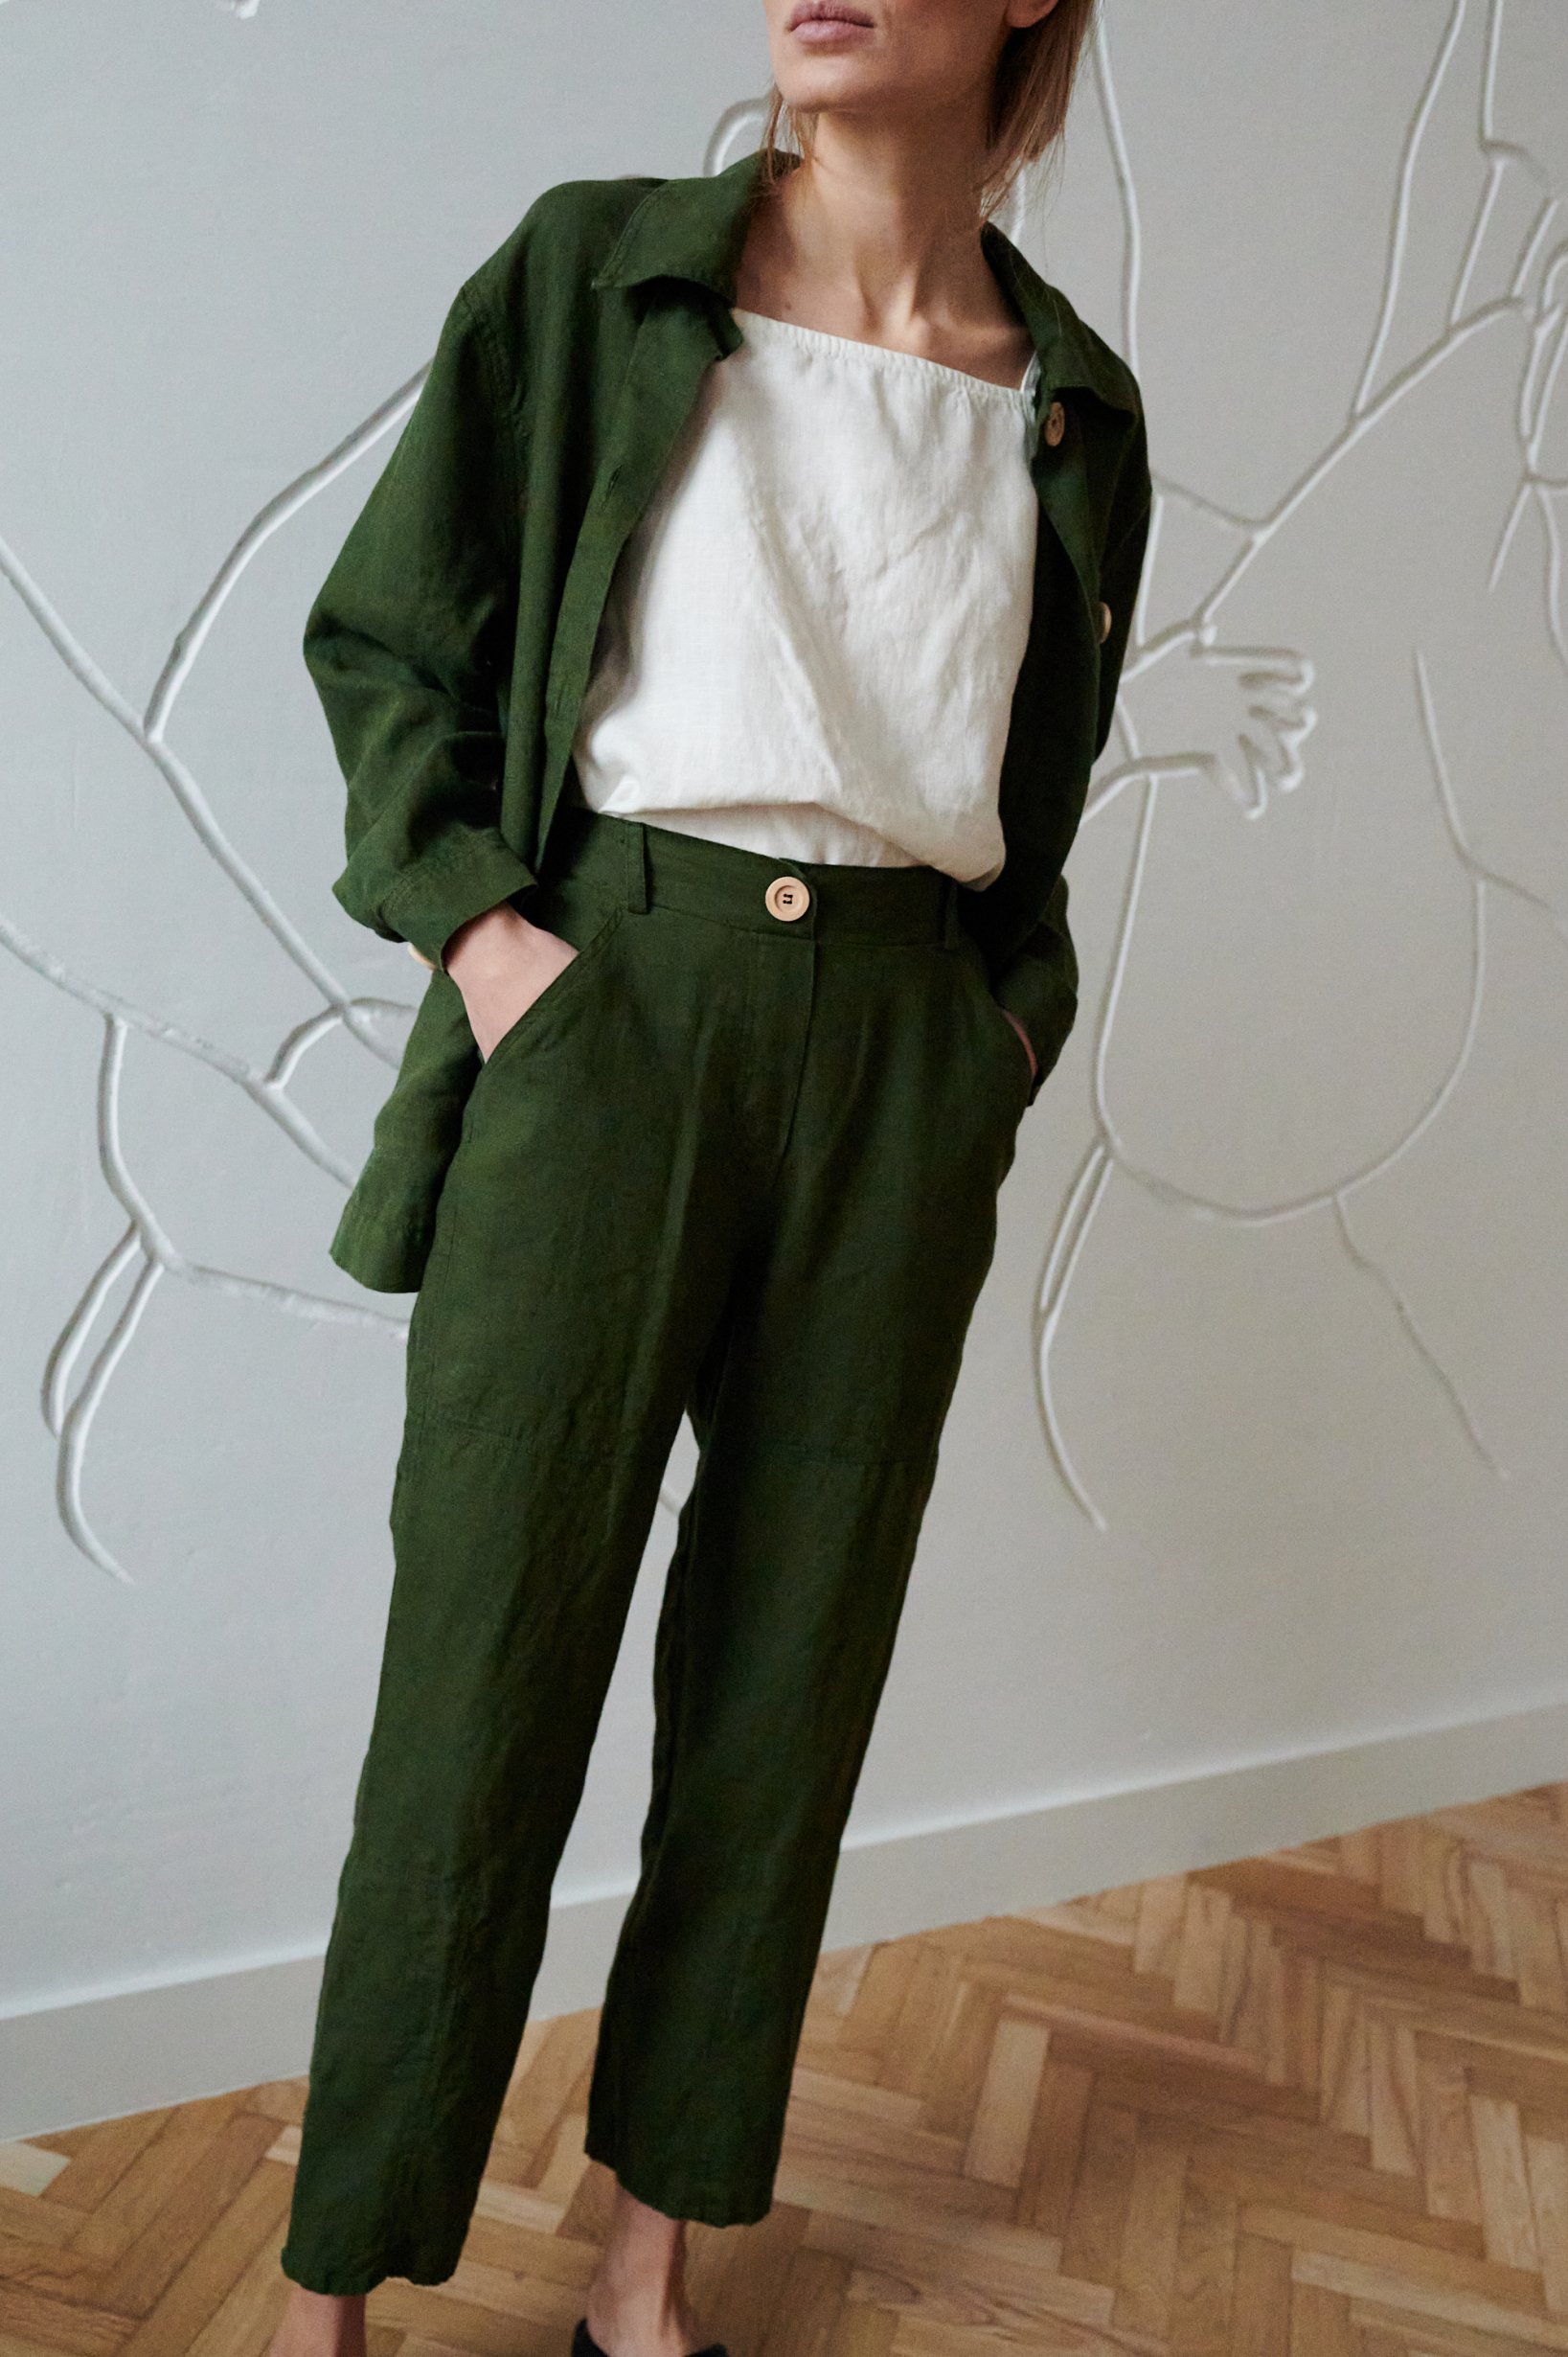 High-waisted linen trousers with pockets and a loose-fitting unbuttoned linen shirt outfit